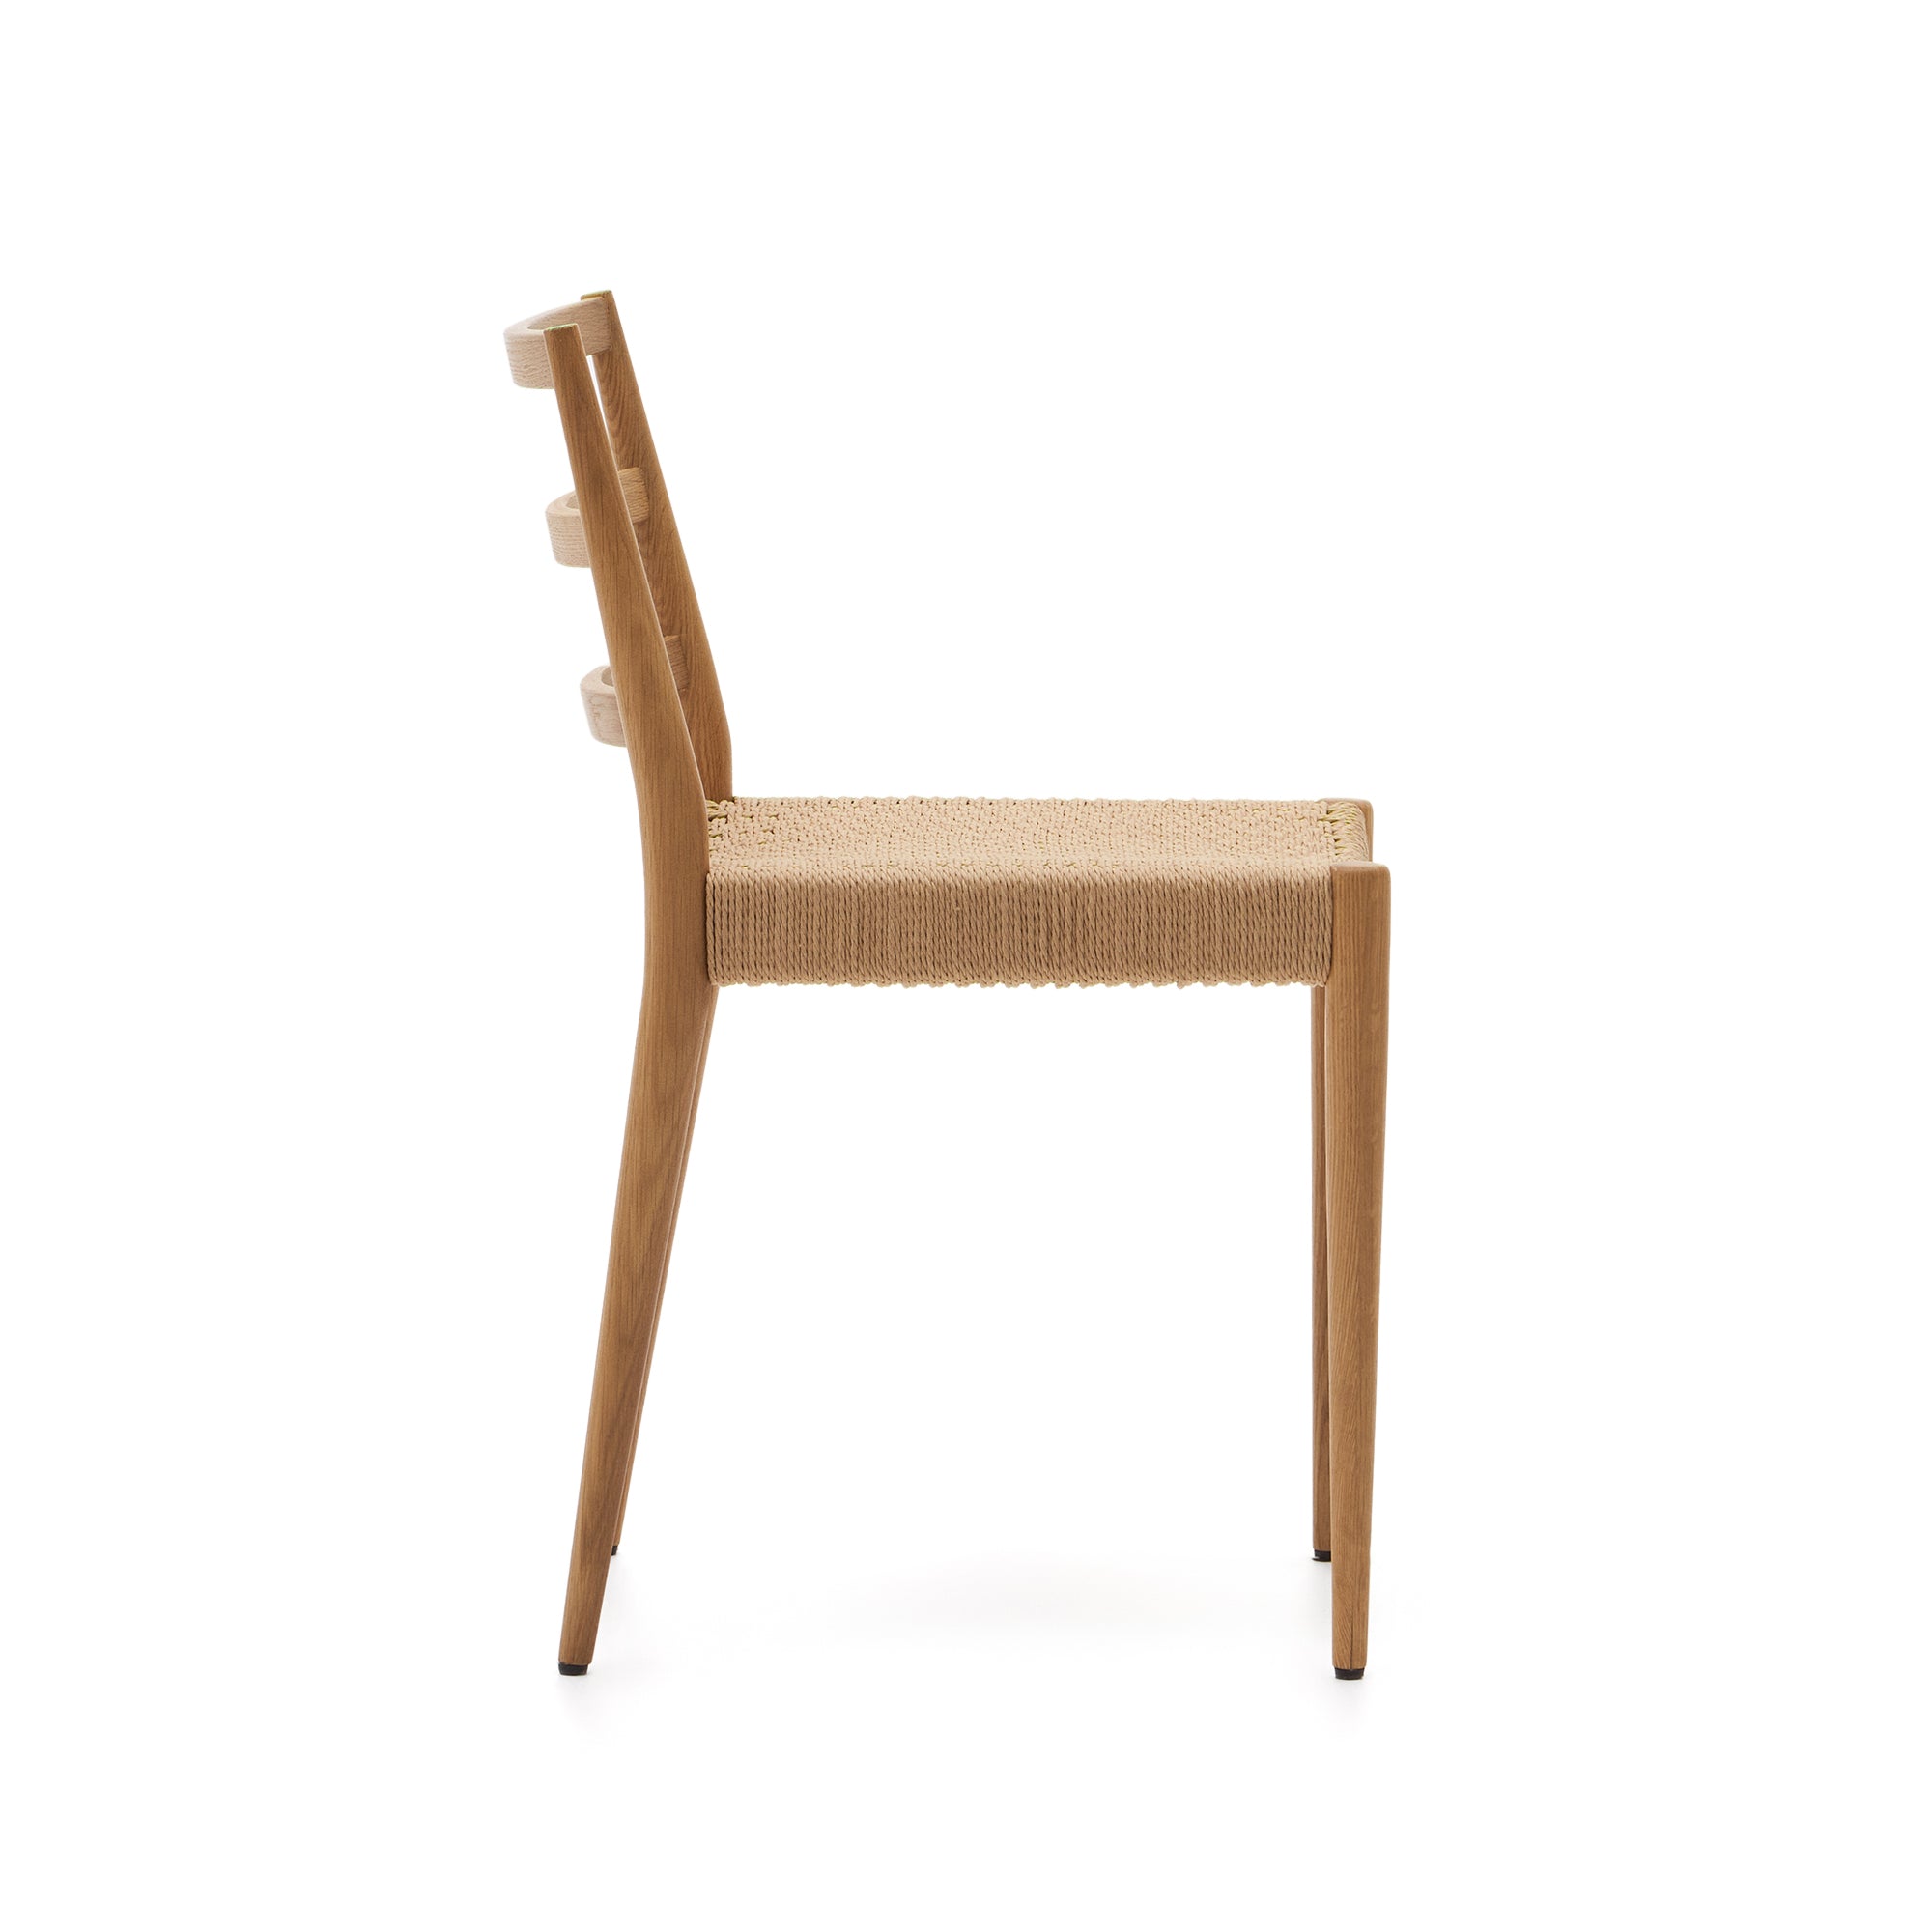 Analy chair in solid oak FSC 100% with natural finish and rope seat